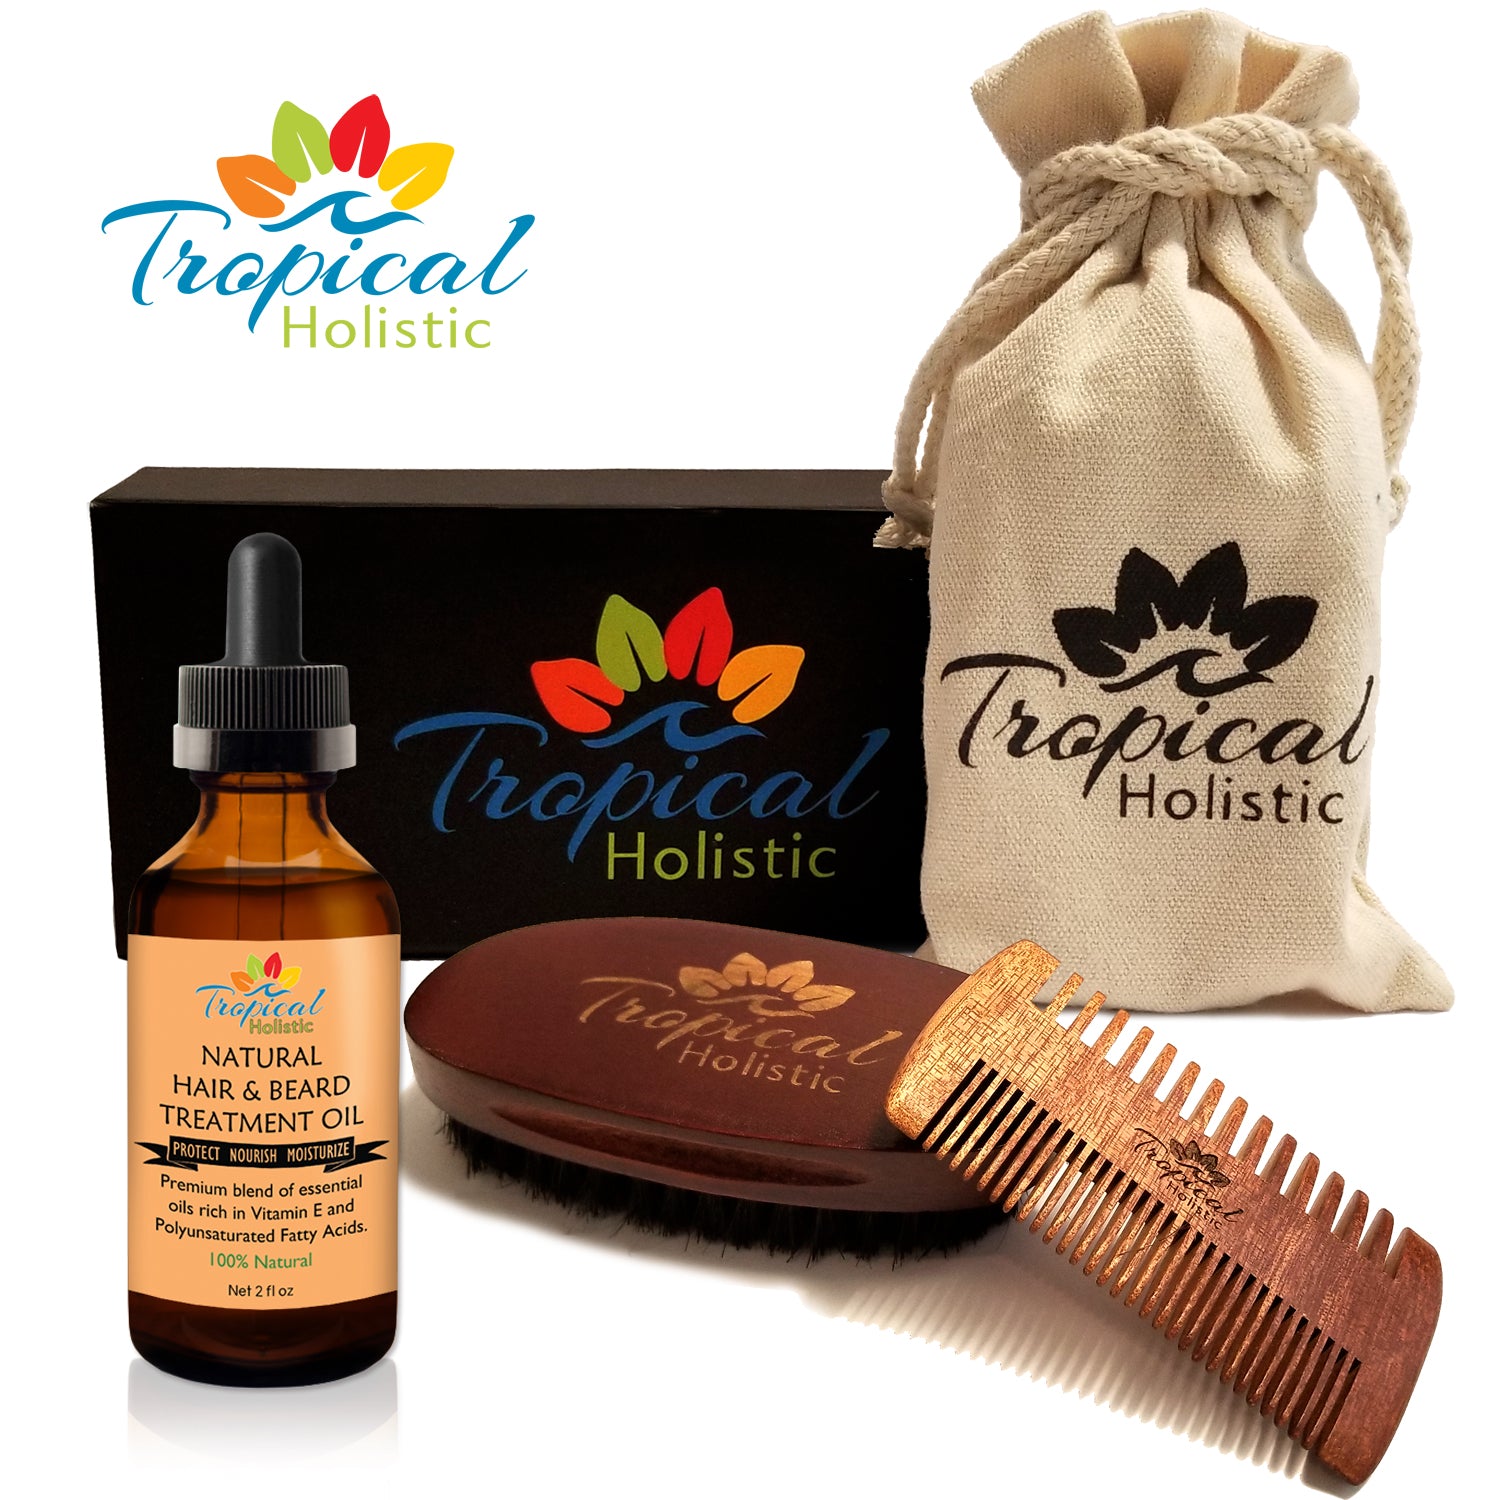 Premium Men's Beard Kit with Quality Brush, Comb, 100% Natural Organic Beard Oil 2oz, and Deluxe Cotton Bag in Gift Box. - Tropical-Holistic